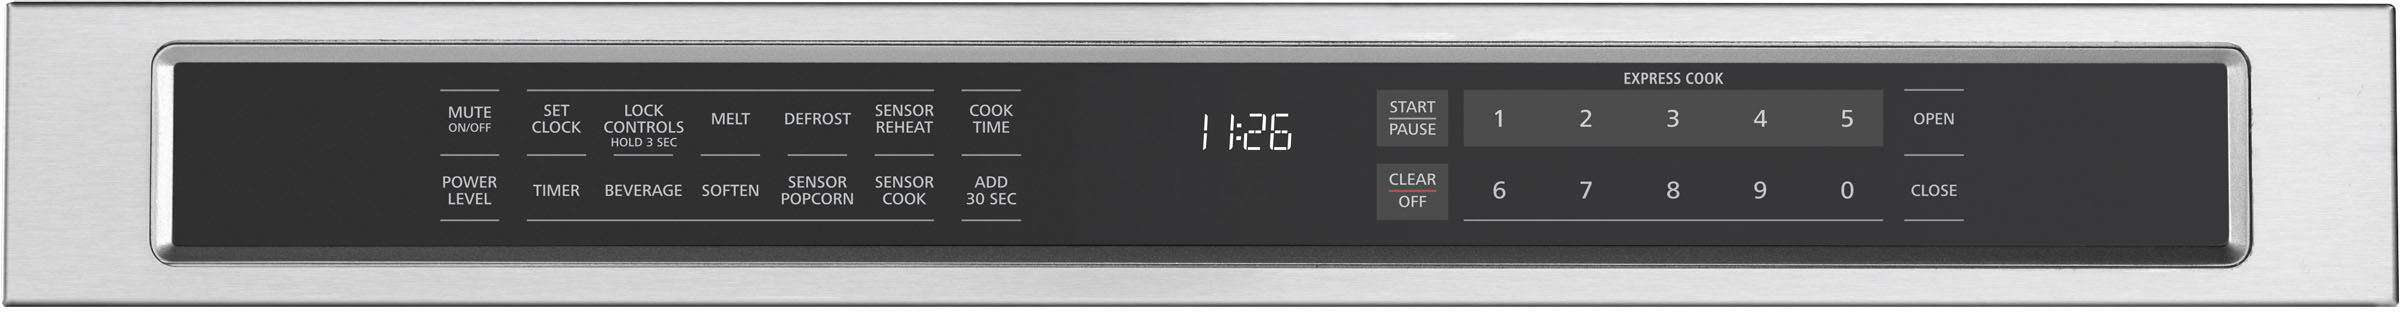 Angle View: Fulgor Milano - Microwave, 24", Built-In Drawer, 950W, 1.2CuFt - Stainless steel